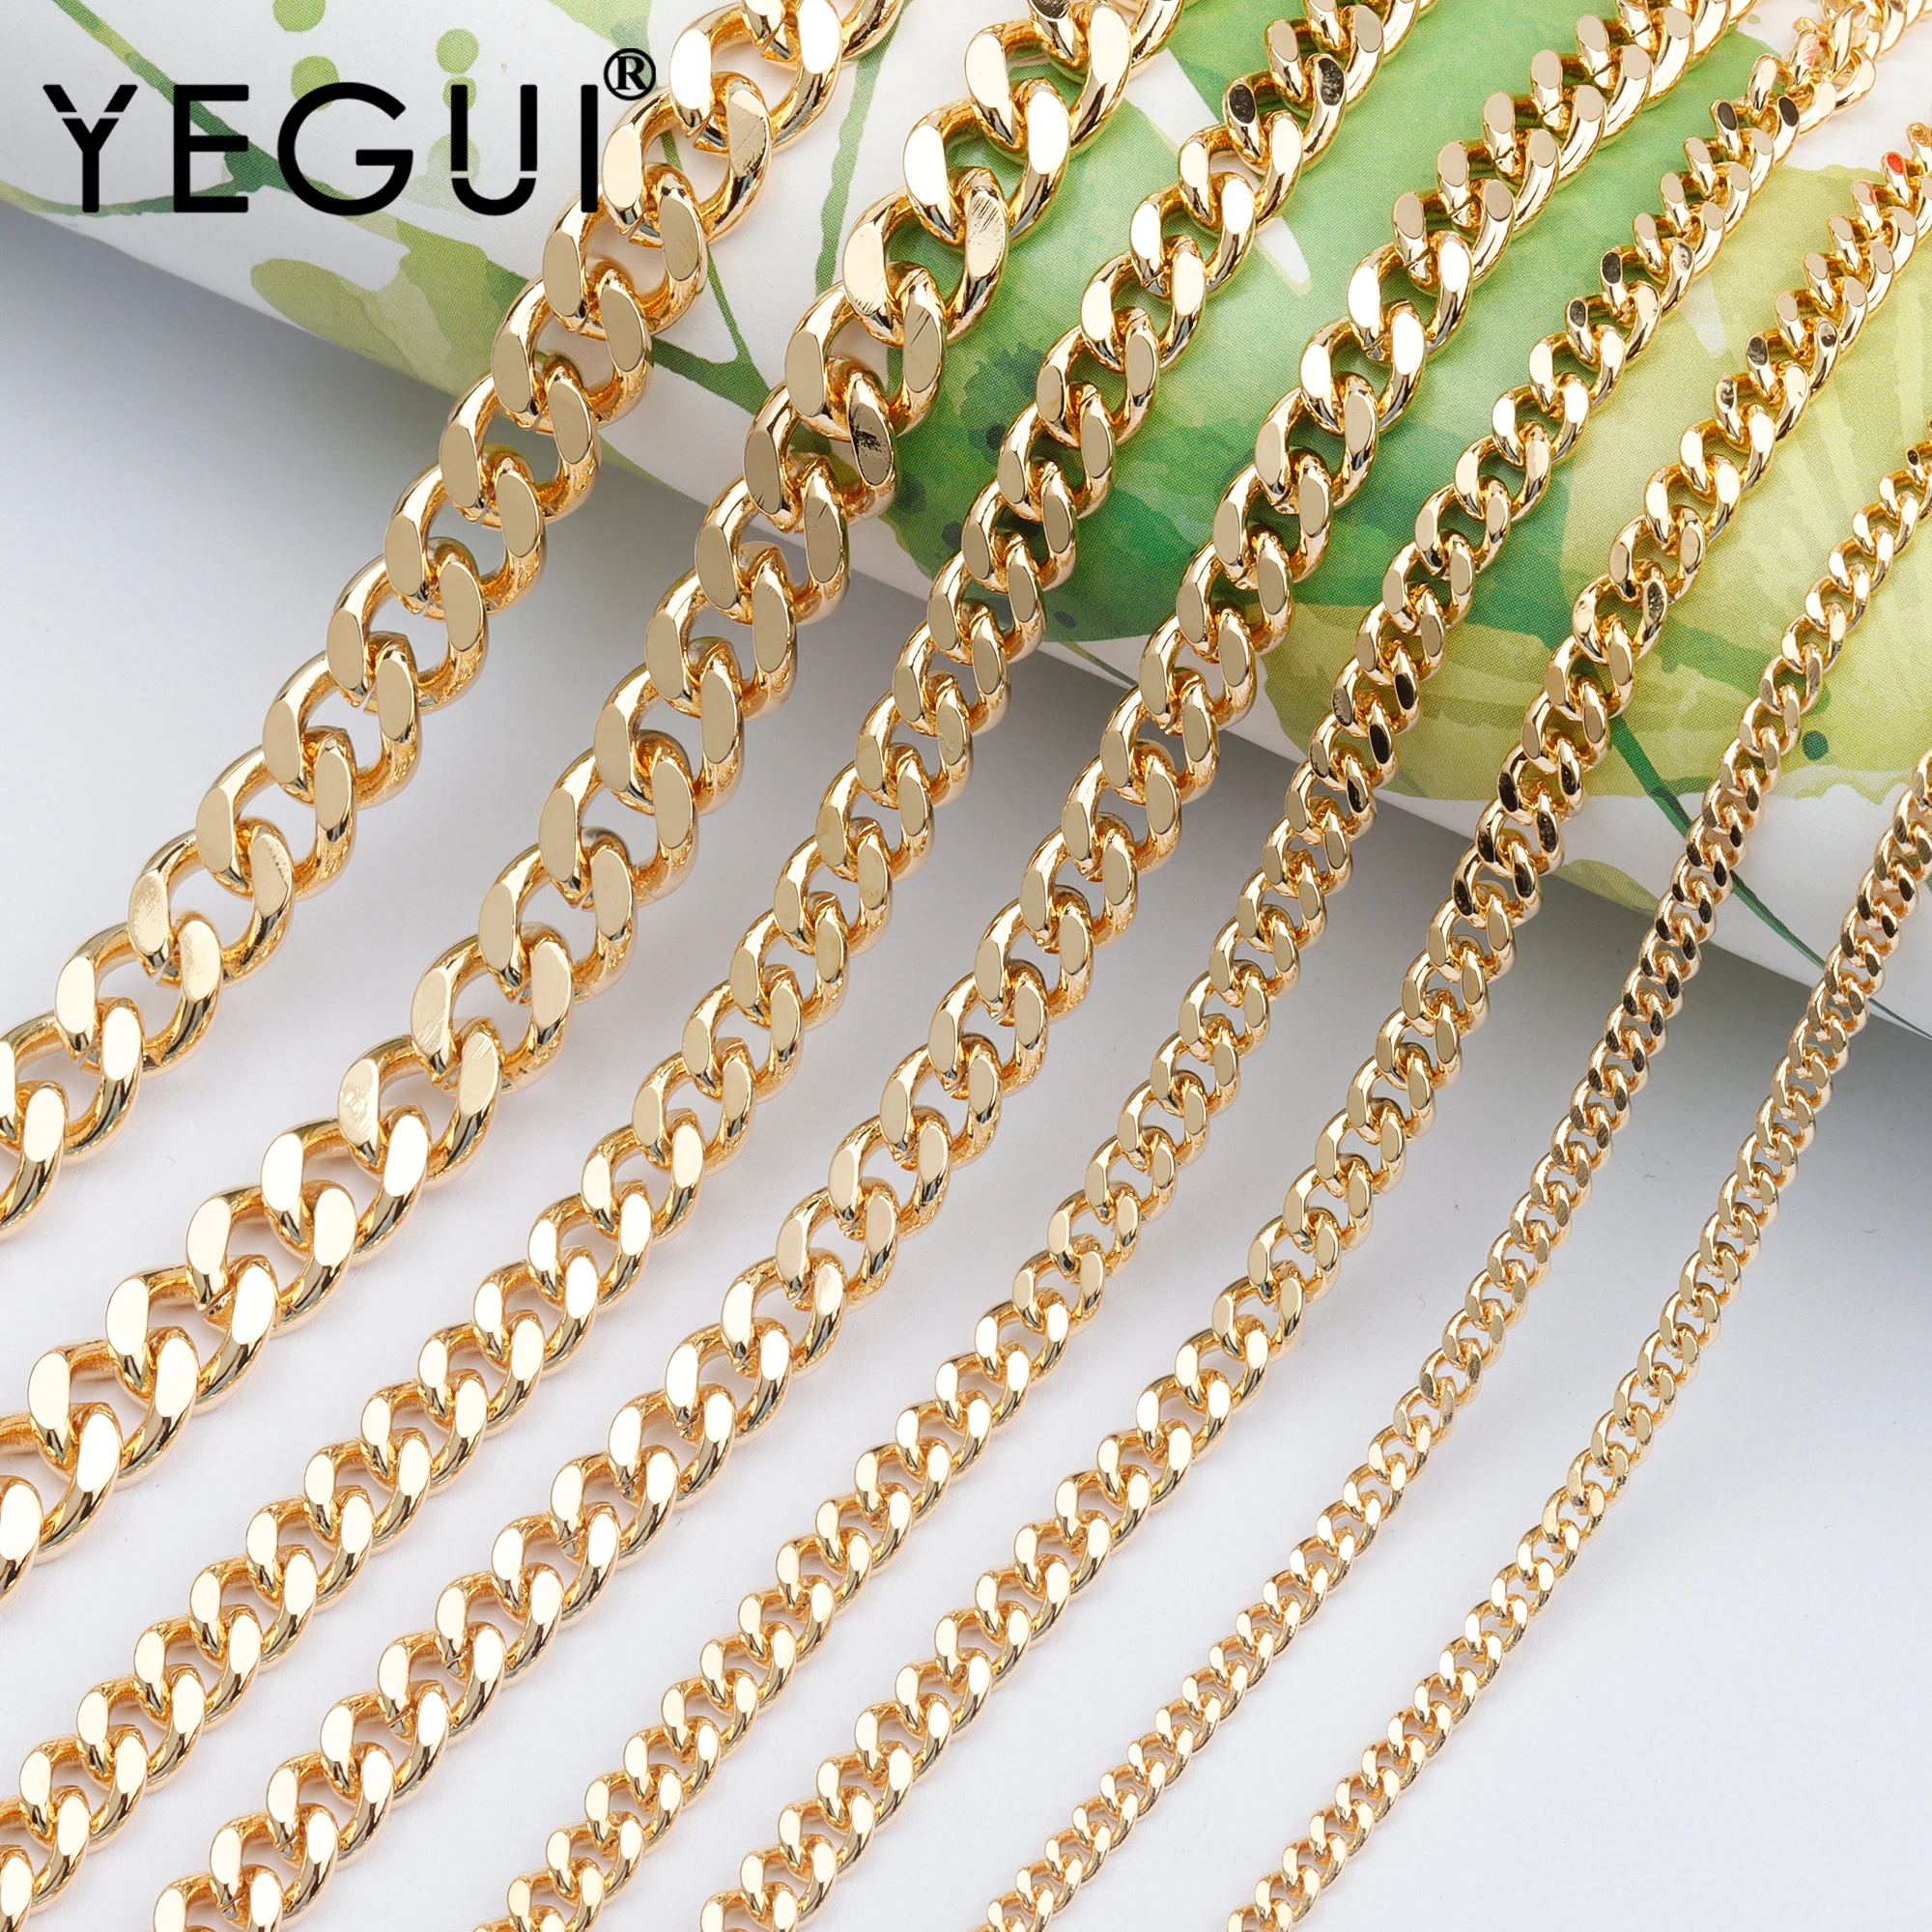 YEGUI C91,jewelry accessories,18k gold plated,0.3 microns,diy chain,charms,hand made,diy bracelet necklace,jewelry making,1m/lot